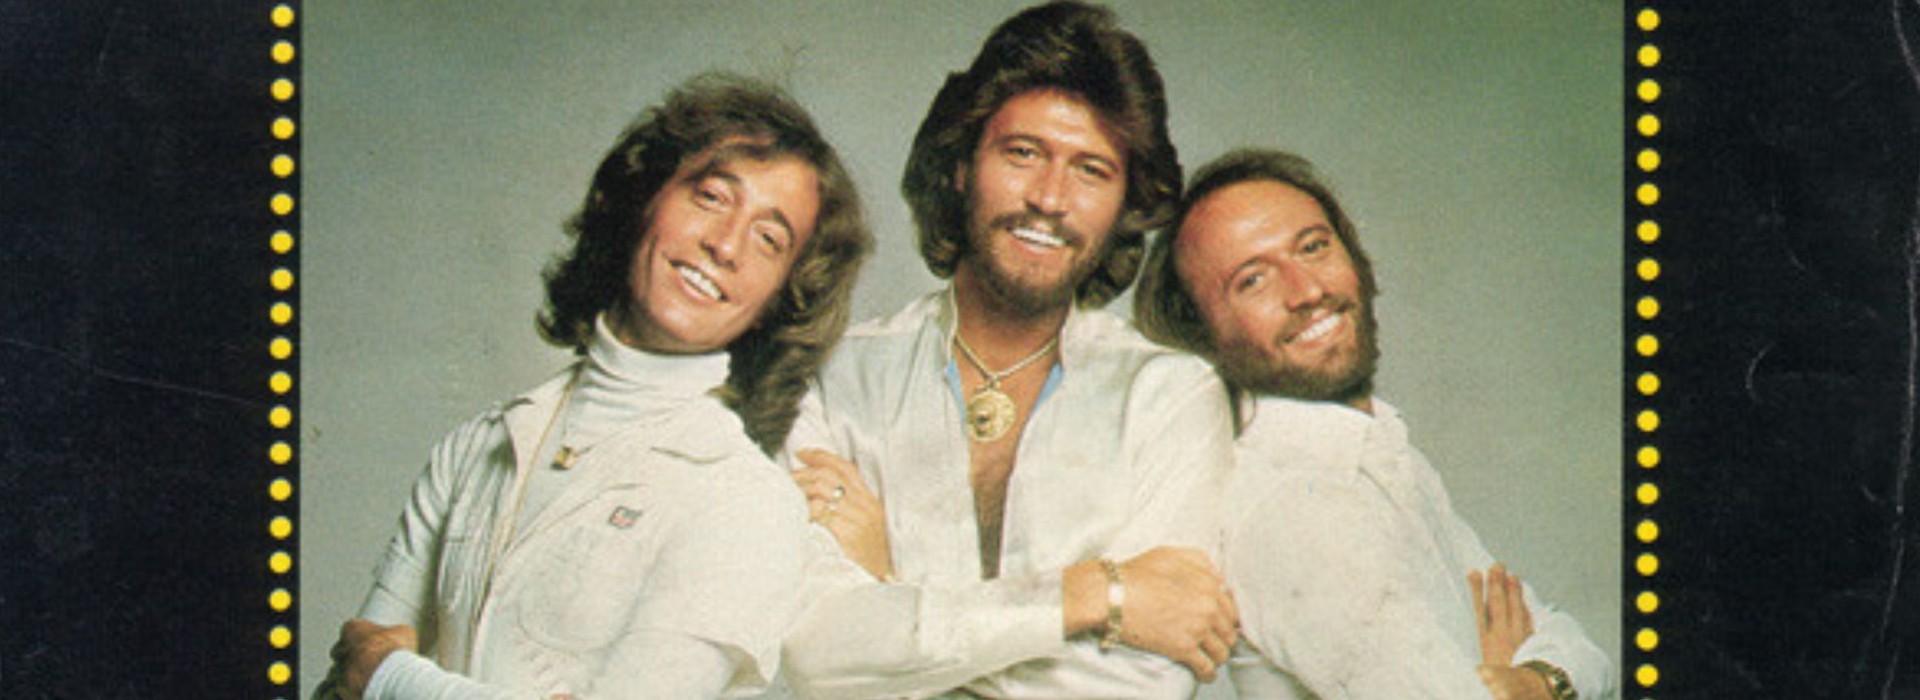 Historia jednej piosenki: Bee Gees "How Deep Is Your Love"